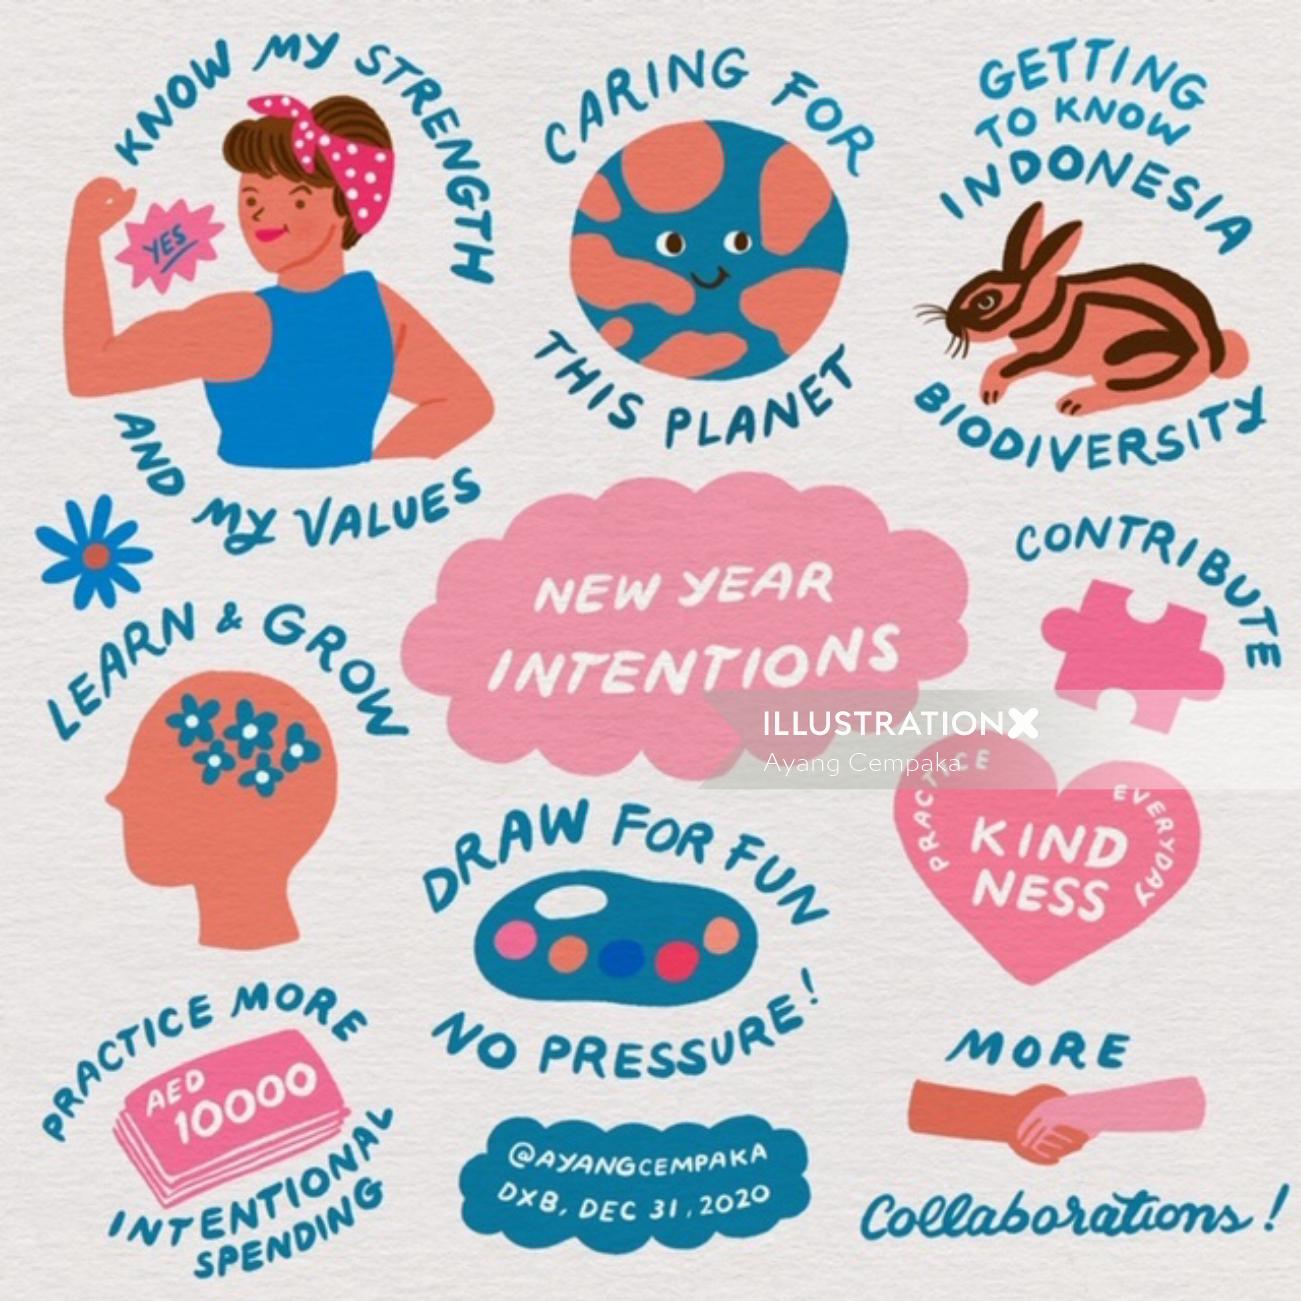 Graphic newyear intentions